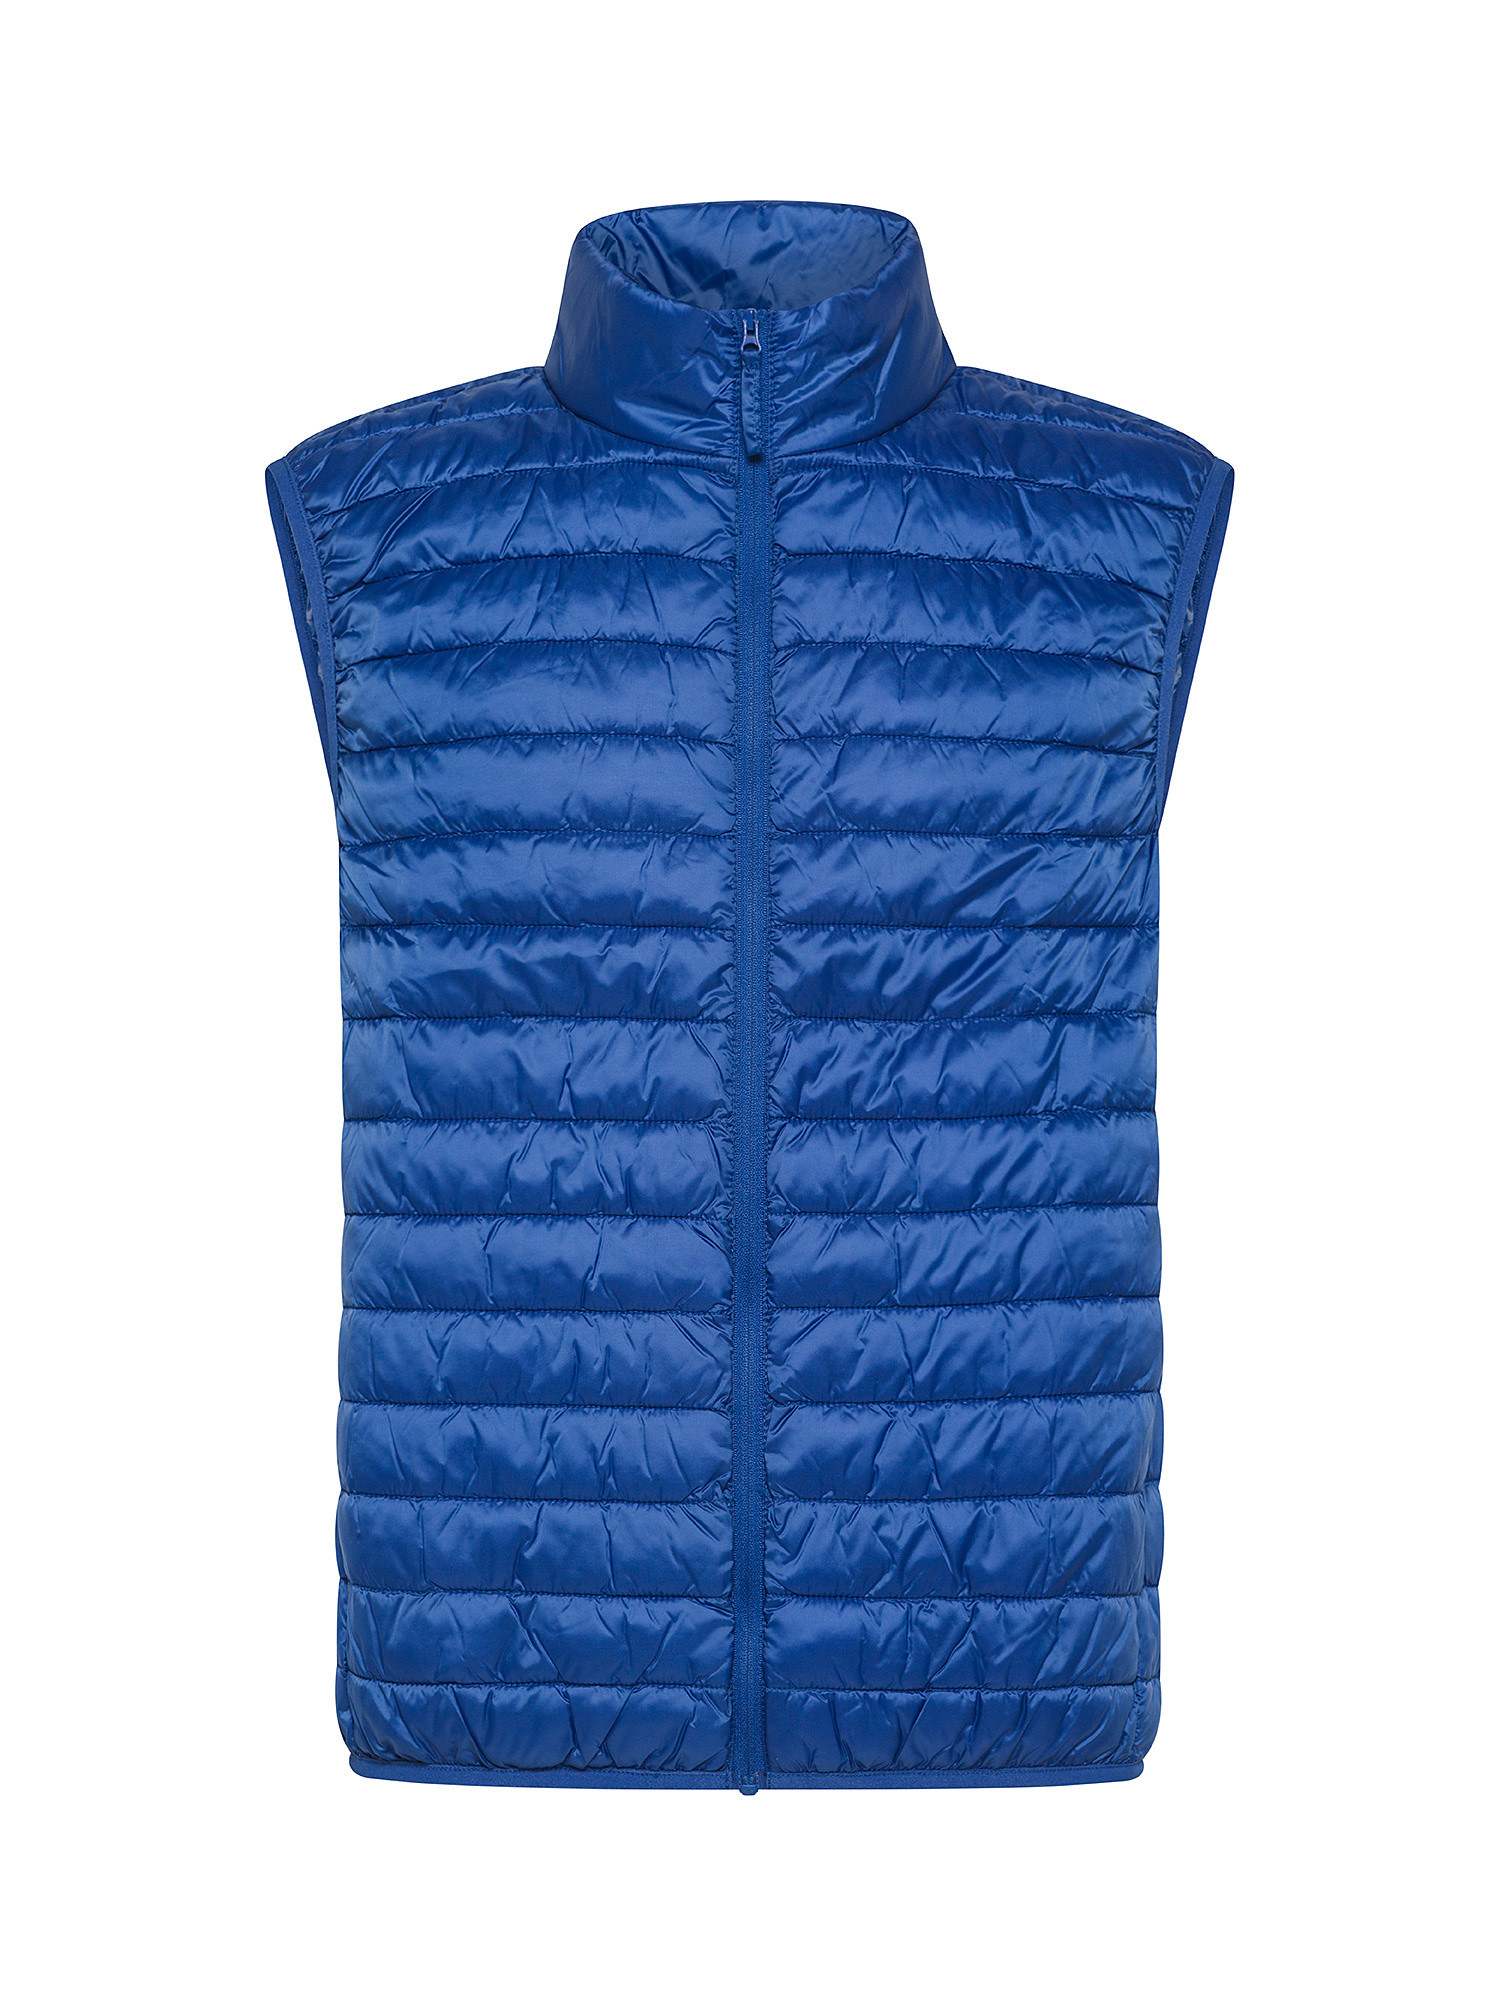 JCT - Quilted sleeveless down jacket, Blue Cornflower, large image number 0